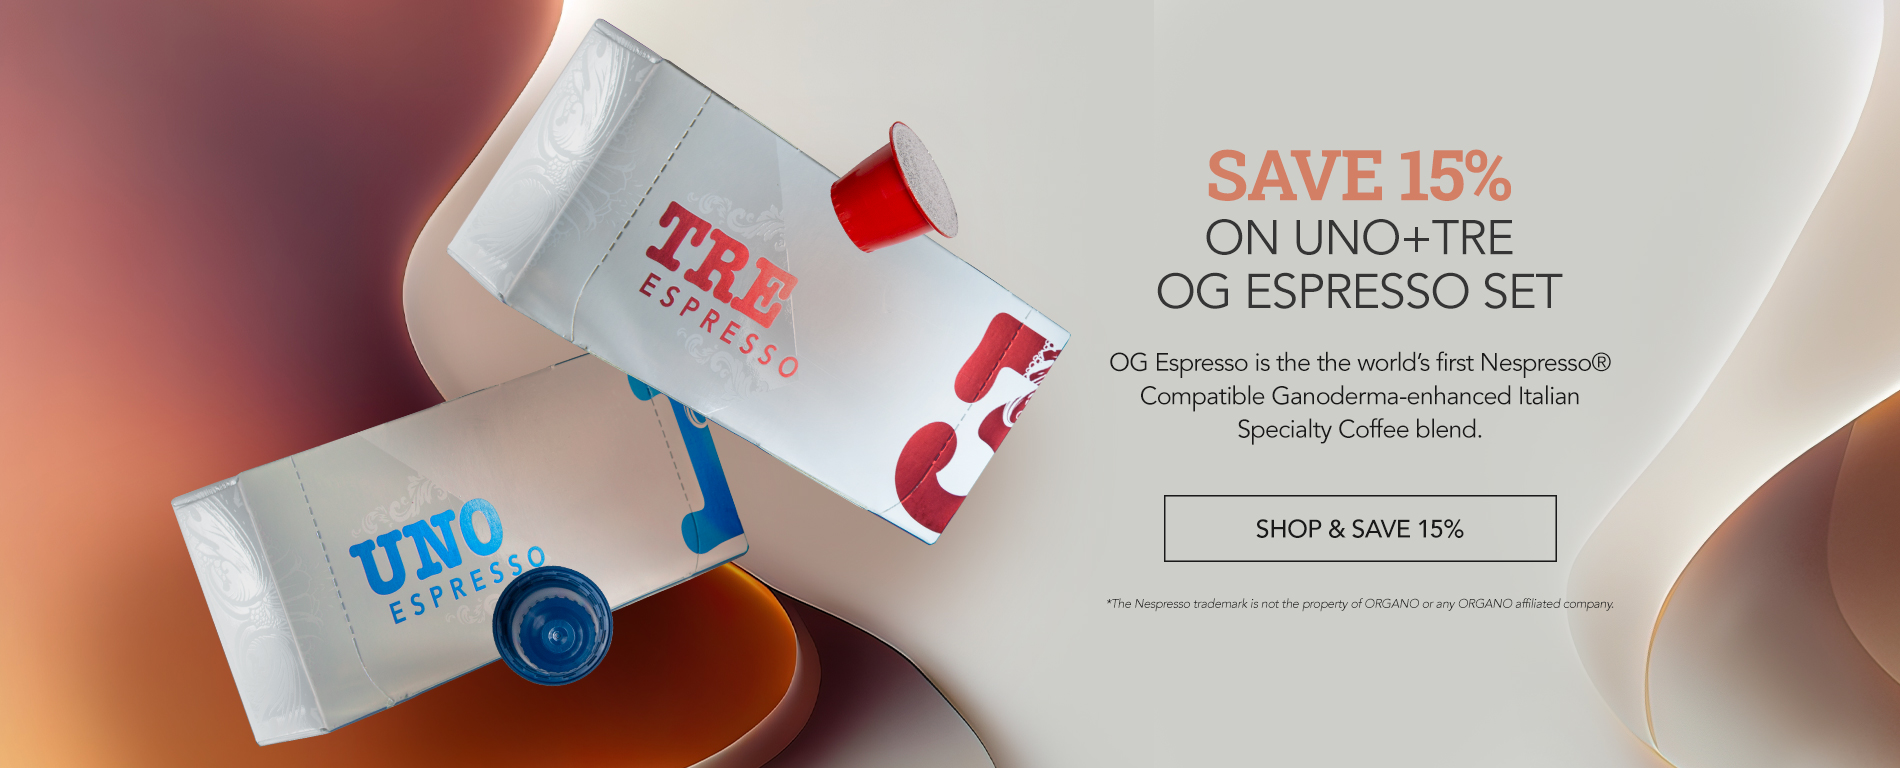 ESPRESSO 15% OFF ENG-CAN 